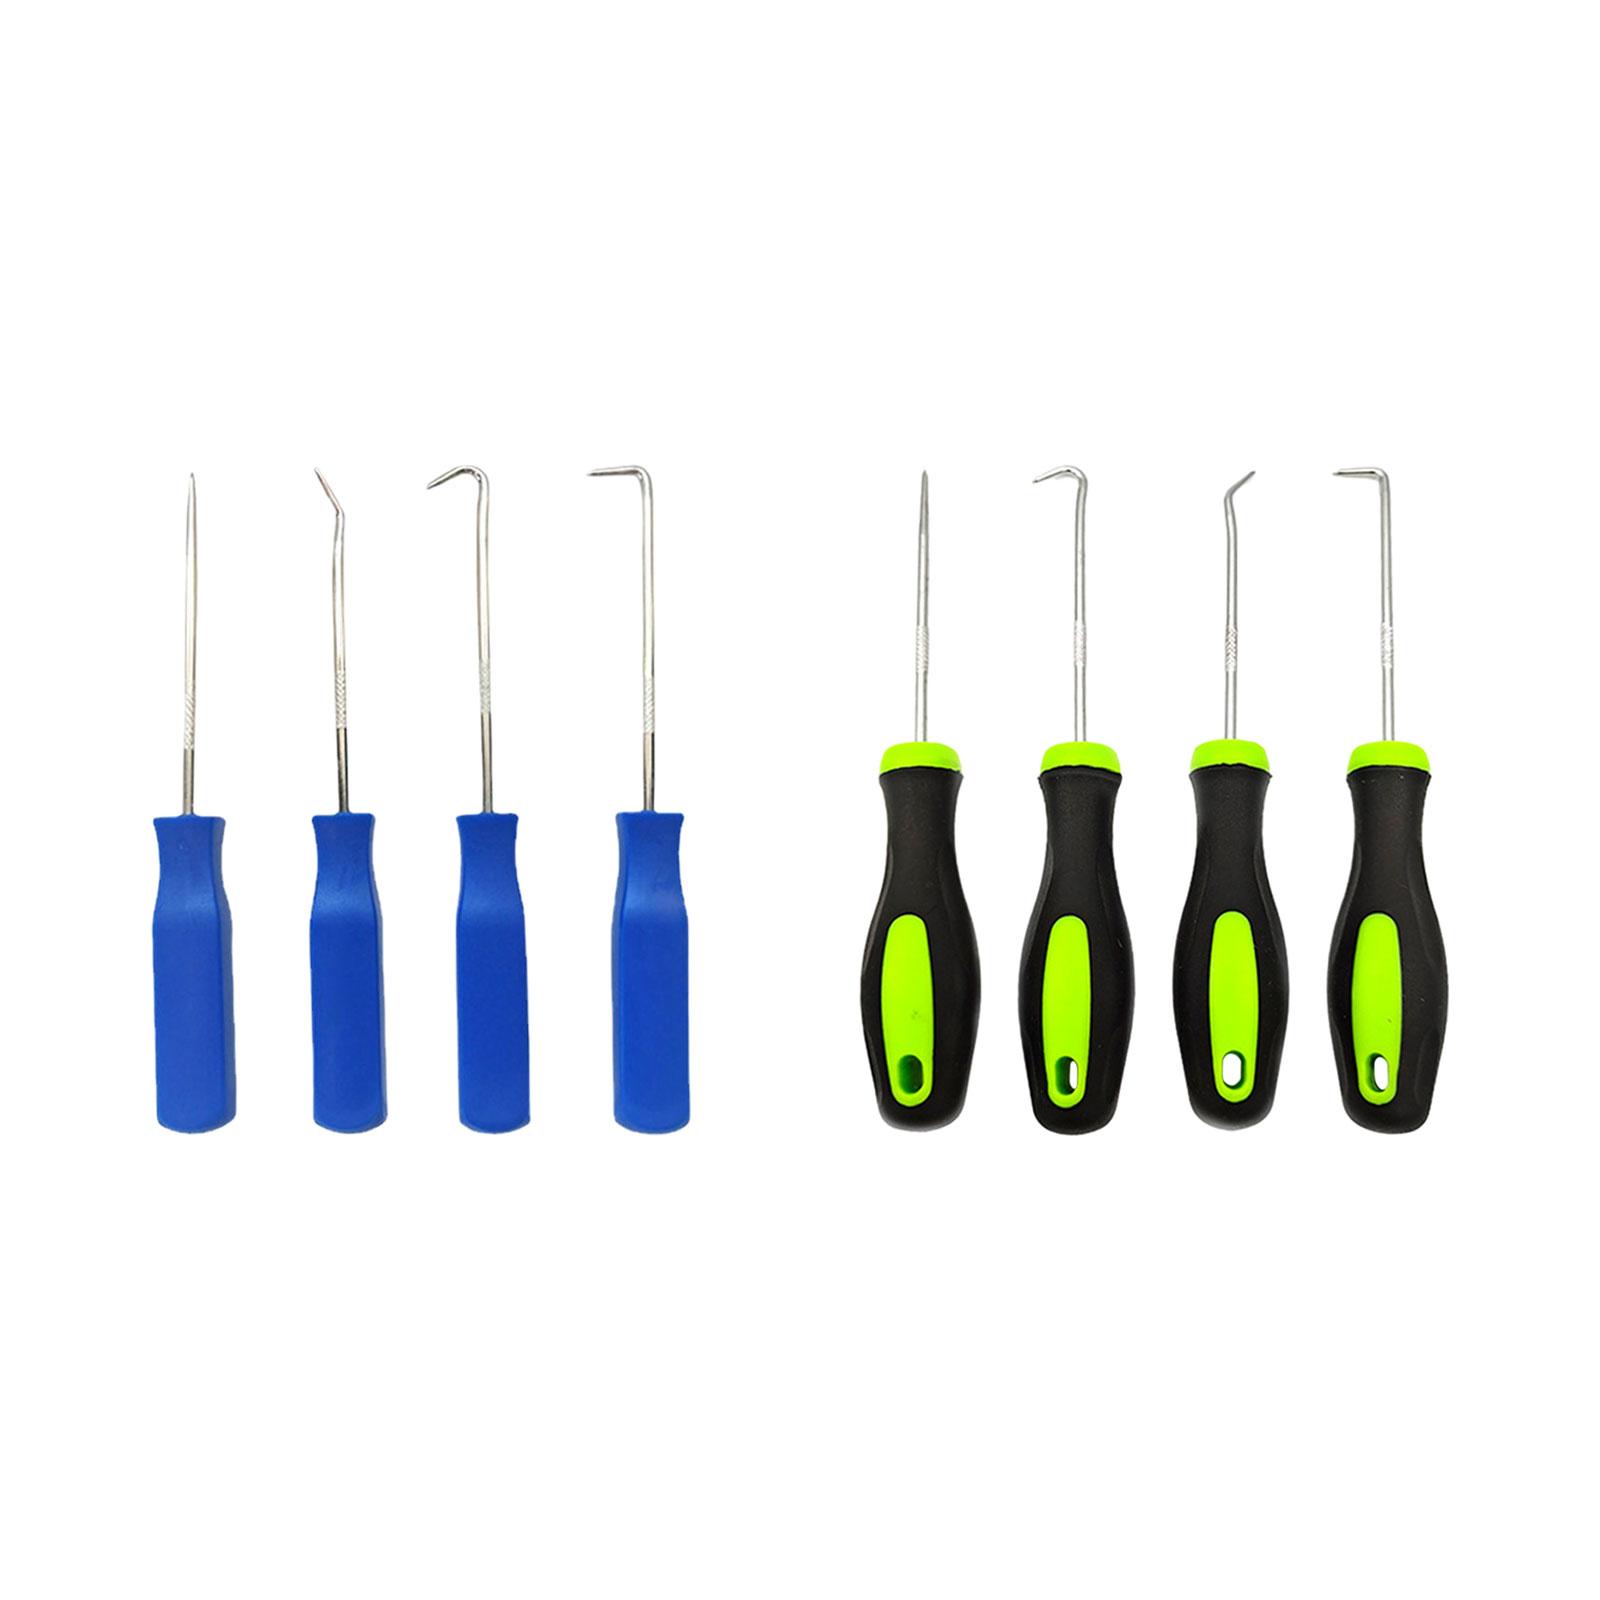 Oil Seal Puller Tool Pick and Hook Set Precision Sturdy Portable Repair Tool Blue